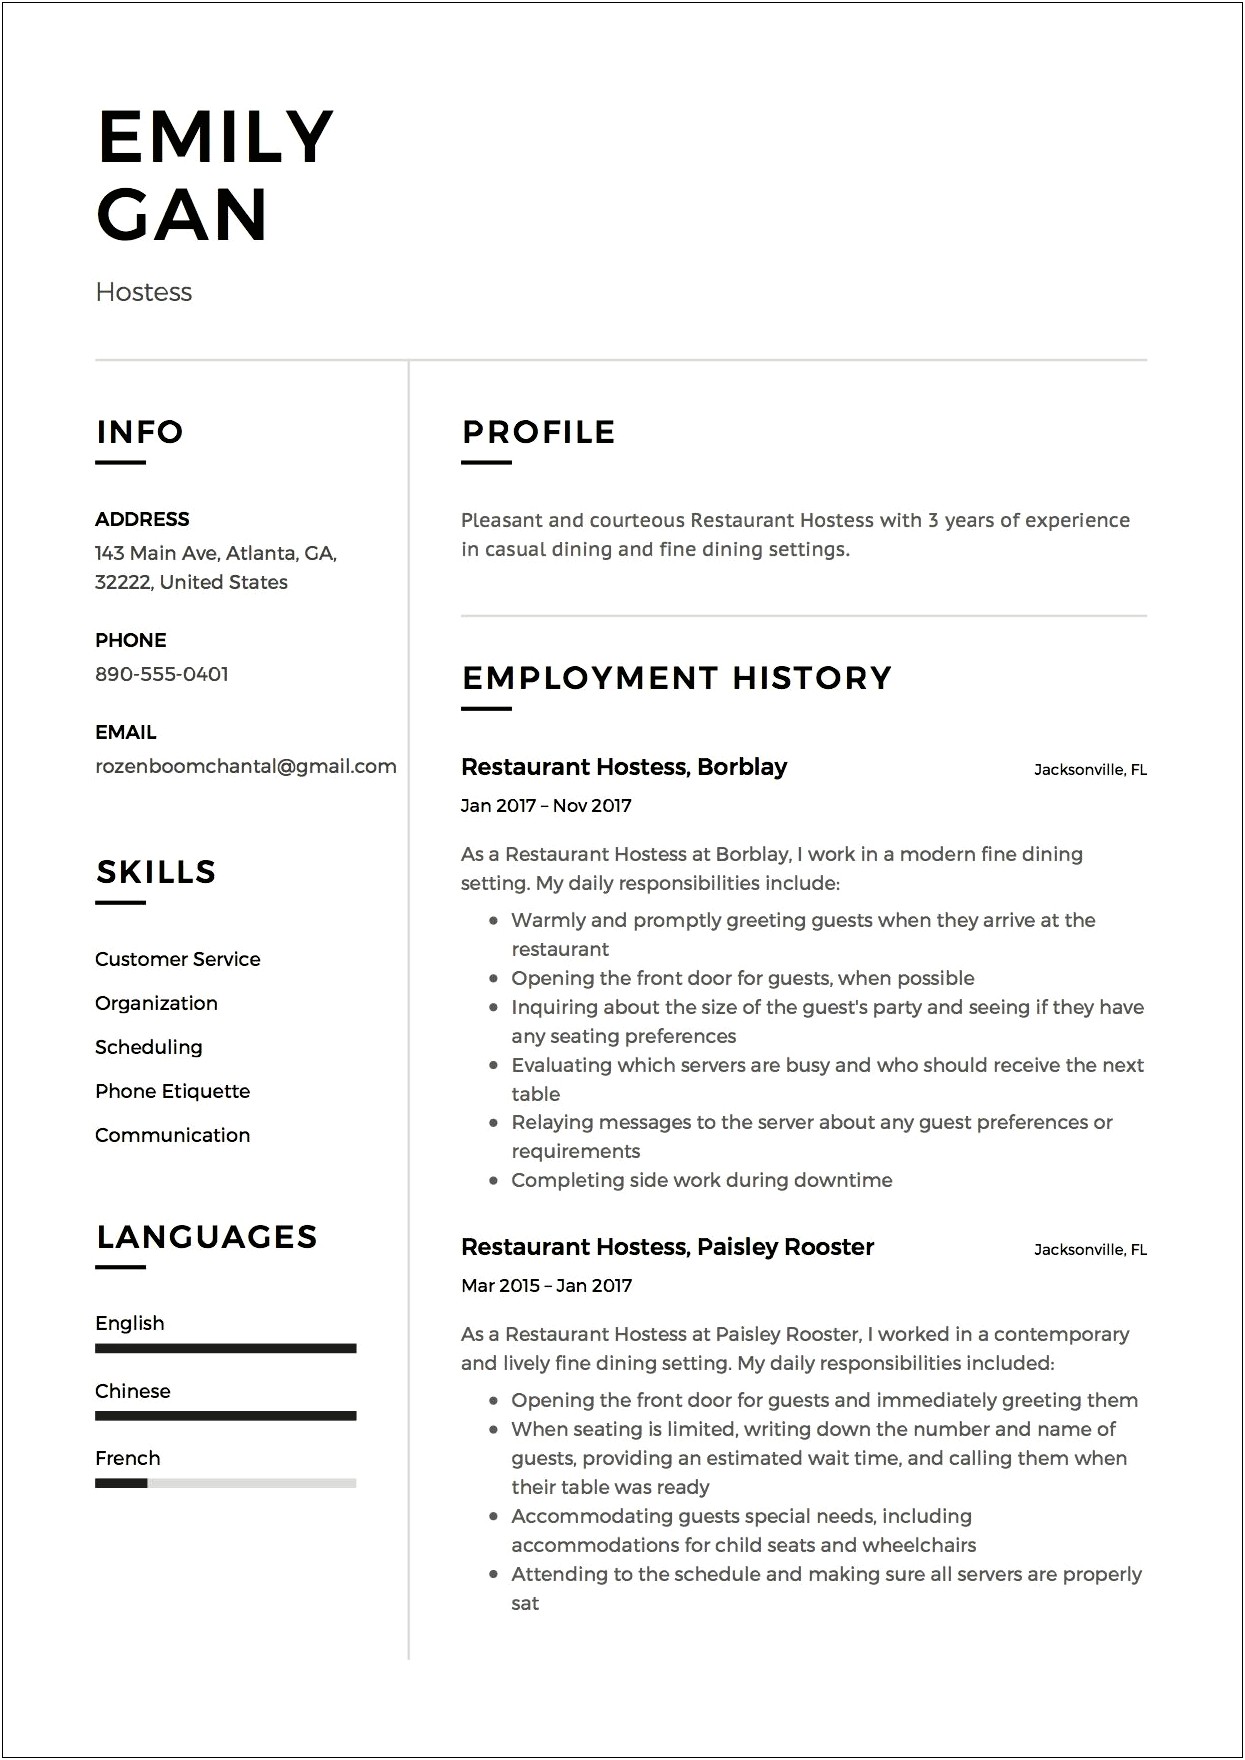 Resume For Hostess Job With No Experience